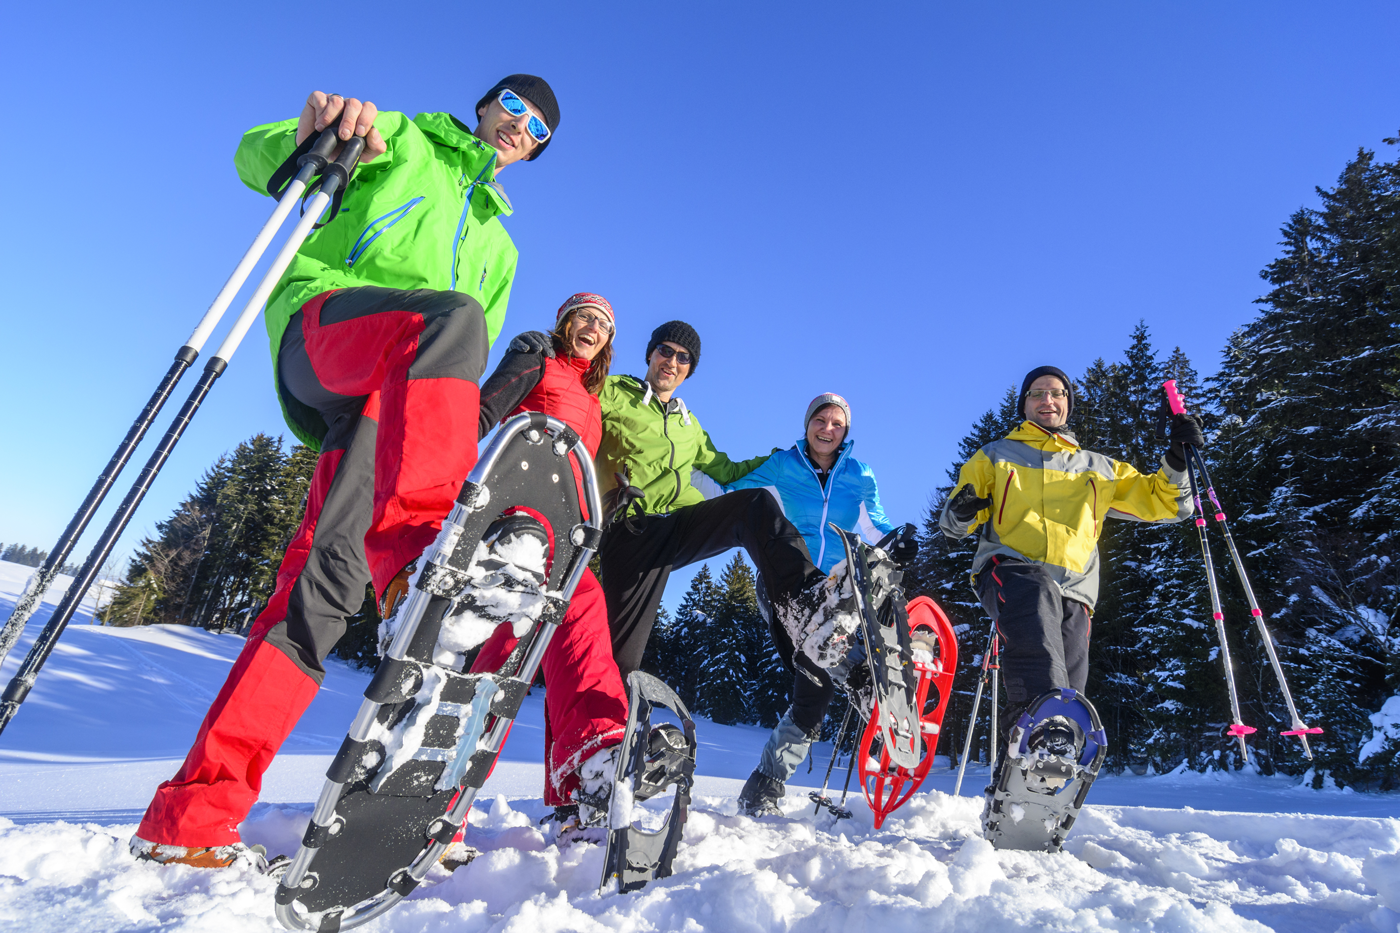 Snowshoeing is just one of the winter activities at Big White Ski Resort when you Ski and Stay at the Comfort Suites, one of the Choice hotels in Kelowna.